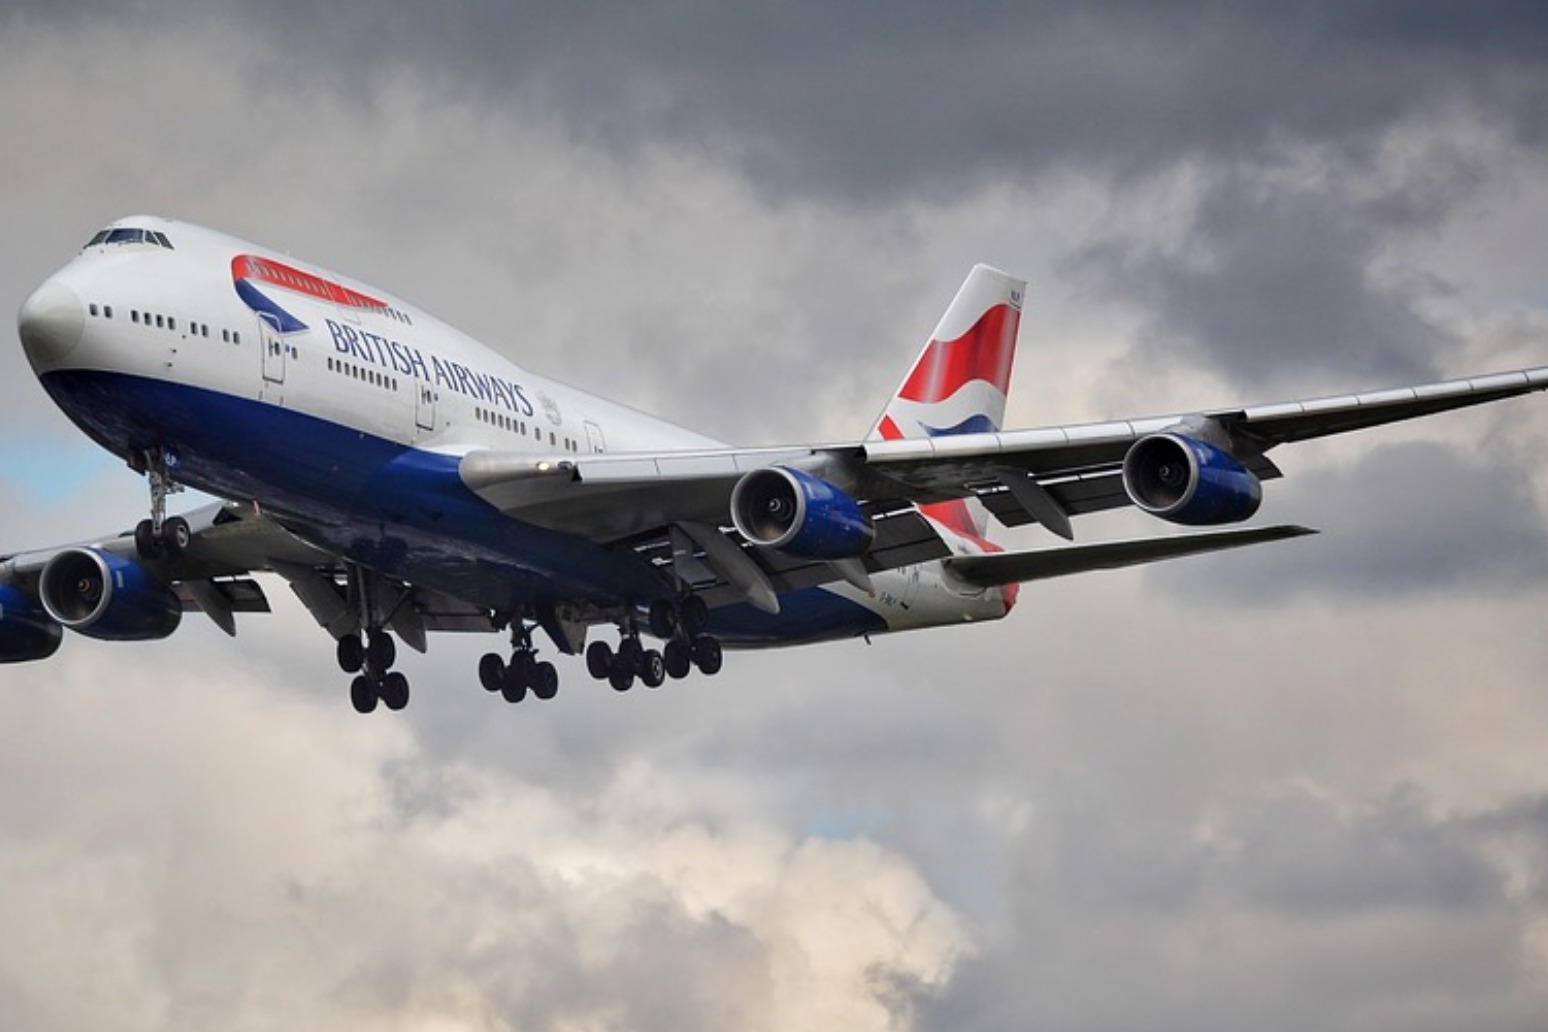 BA to be hit with fine after data breach 